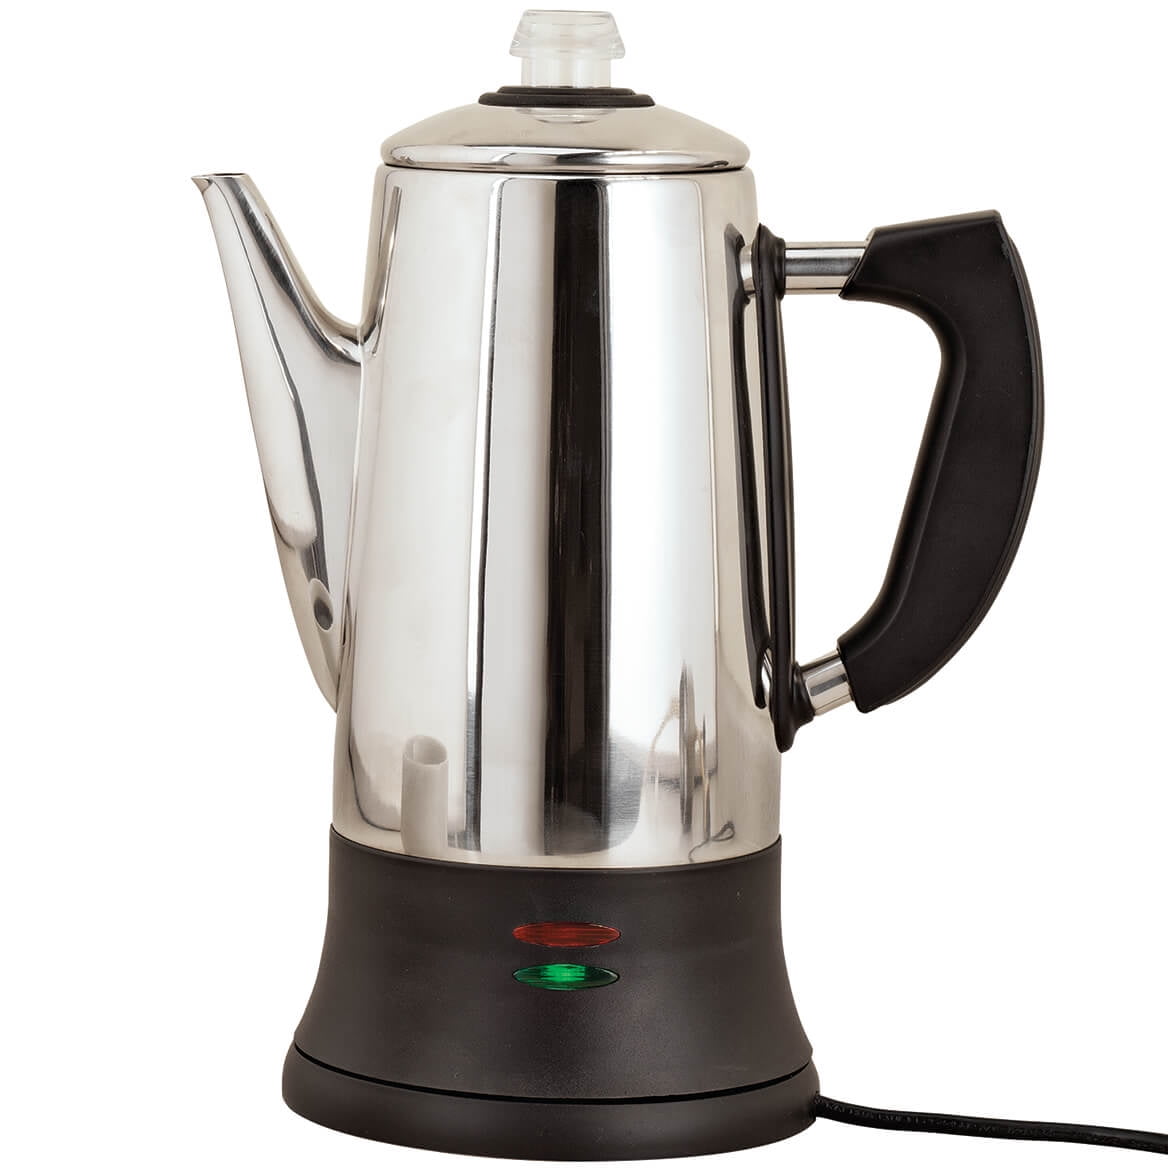 Electric Percolator 6 Cup Stainless Steel Coffee Maker Pot Portable Vintage 